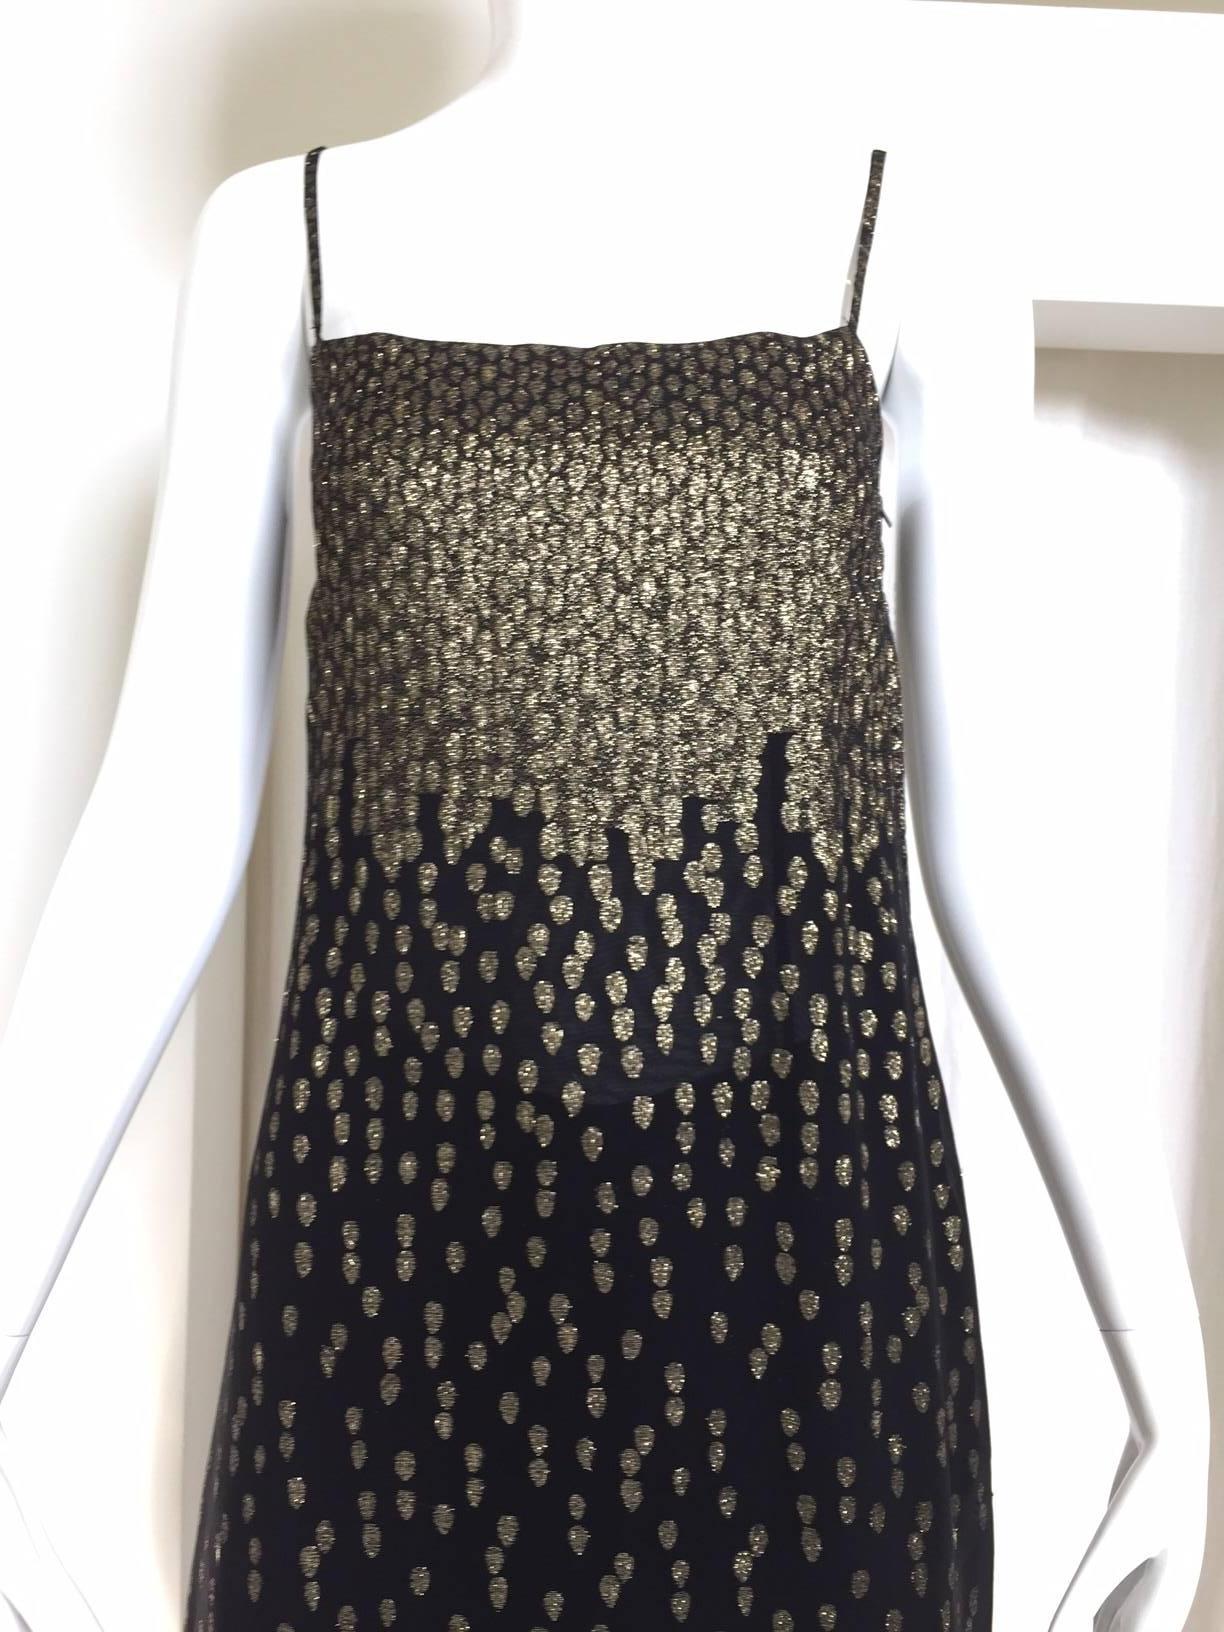 70s Christian Dior Metallic gold and black silk tunic top and pant ensemble. spaghetti strap and zipper on the side. 
Fit US size 2
Bust: 32" / Waist: 29" / Hip: 32" / Tunic top length: 45"
Pant waist: 27" (elastic) / Hip: